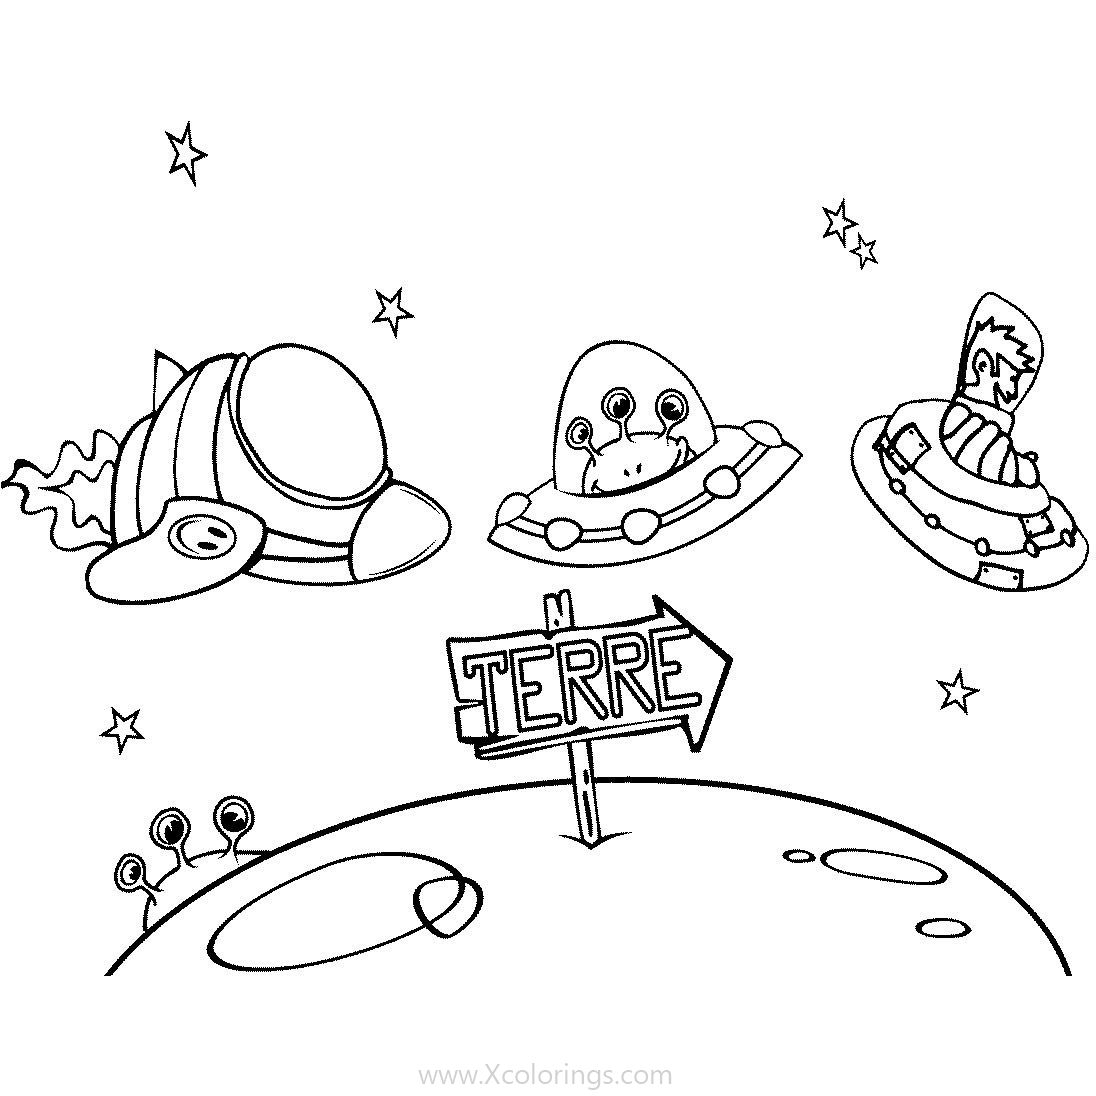 Free Aliens in Spaceships Coloring Pages printable